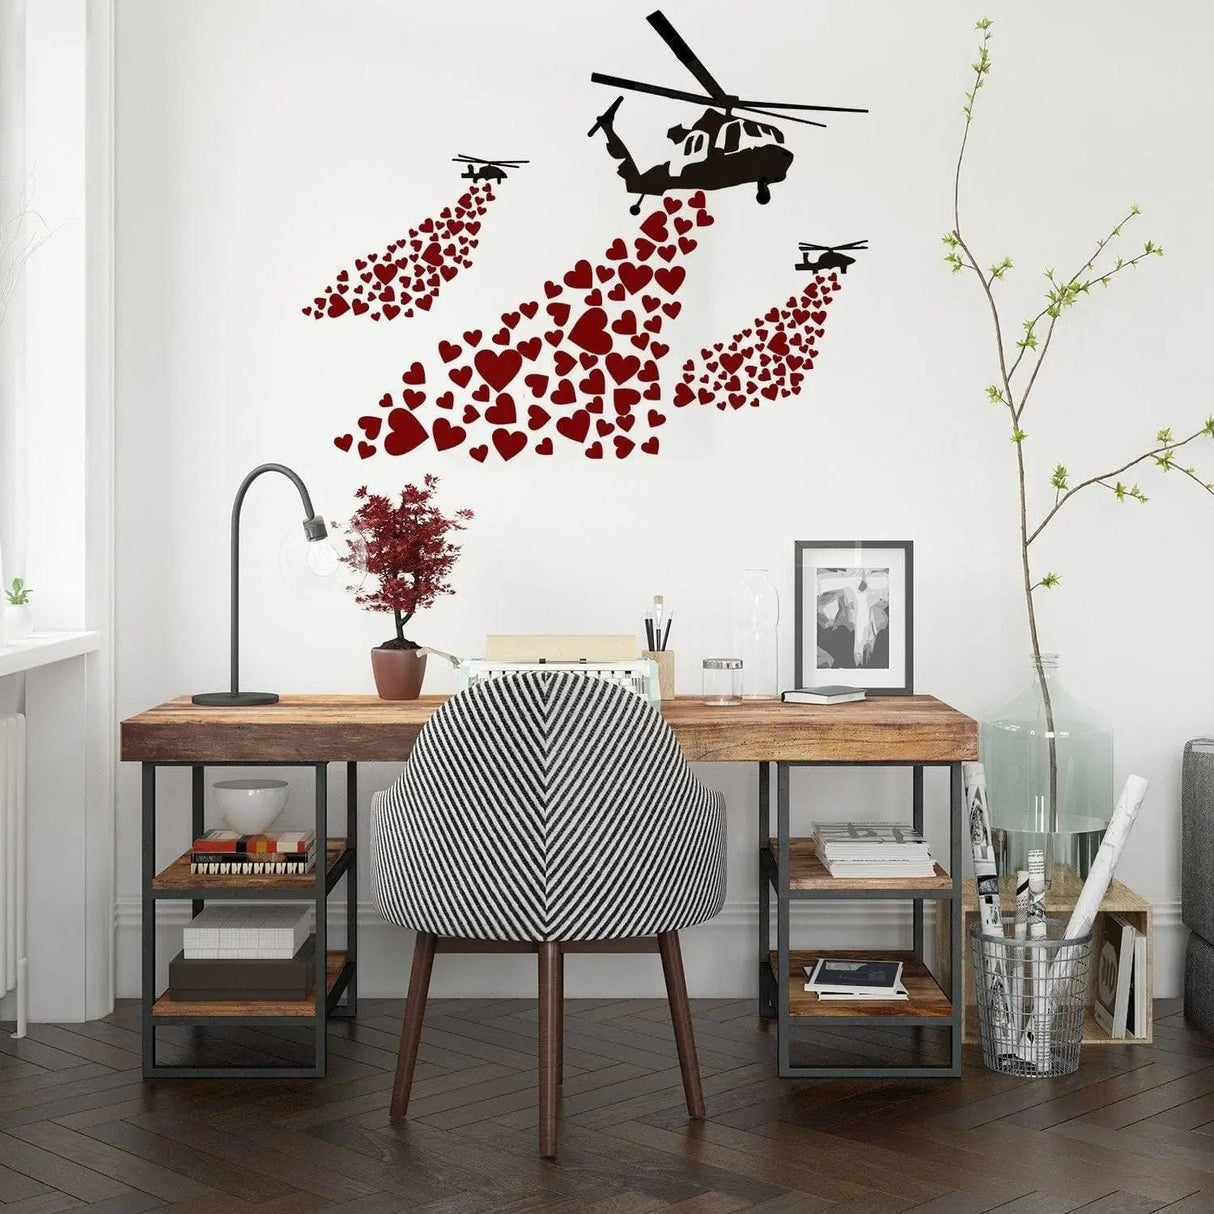 Banksy Vinyl Wall Decal Helicopter with Hearts - Street Art Graffiti Helicopters Decor Sticker - Heart Love Mural Boys Room Decor Artwork - Decords